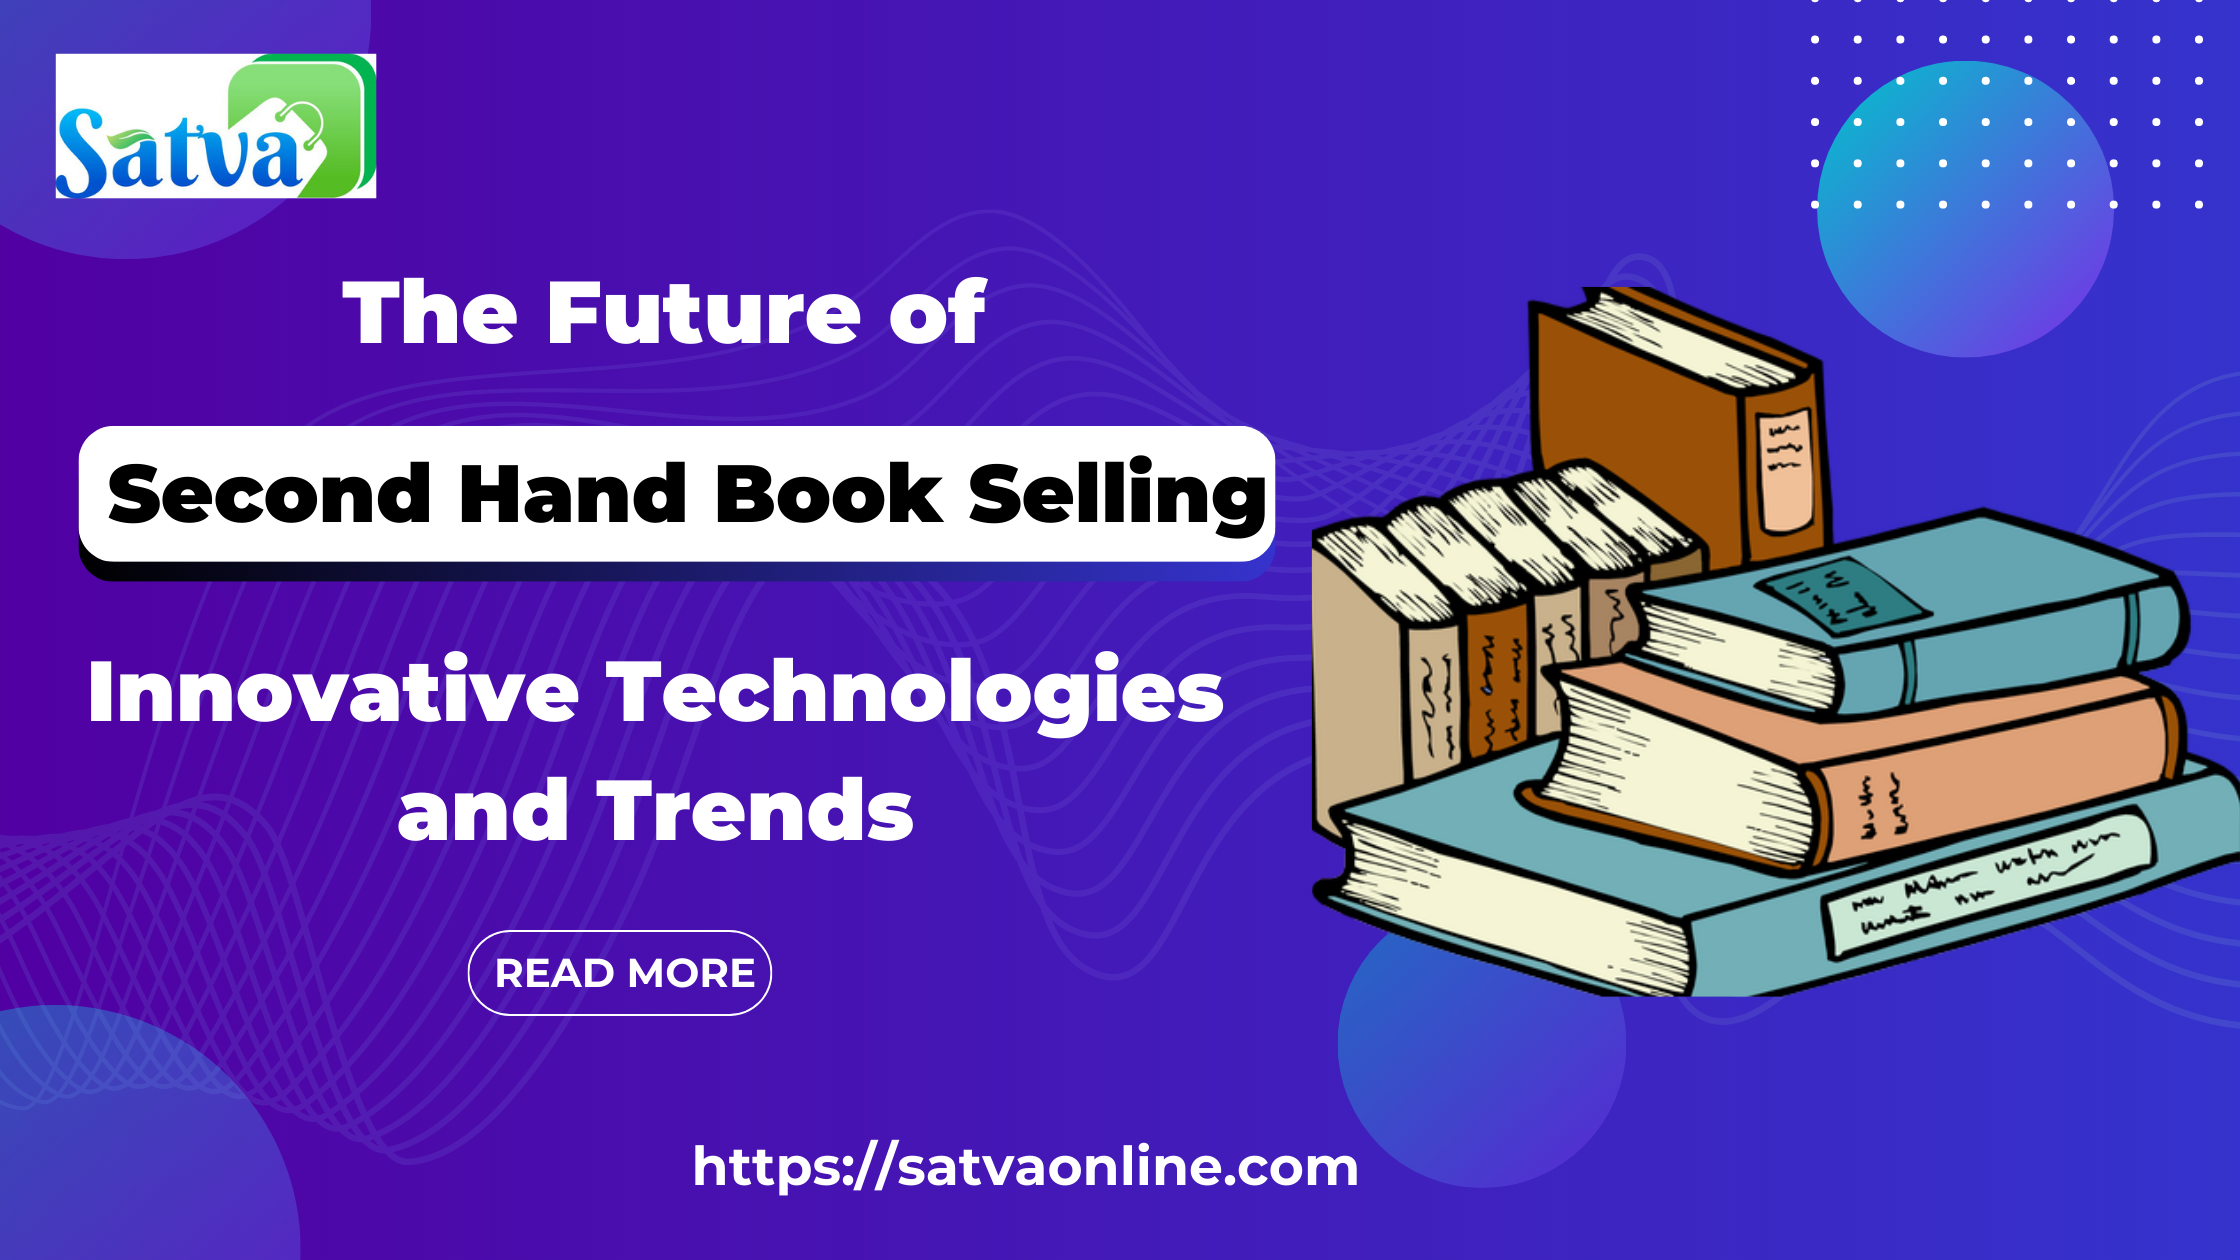 Discover the future of second hand book selling and innovative technologies. Learn how platforms like "Satva" revolutionize the market and benefit book readers, students, and exam preparation.